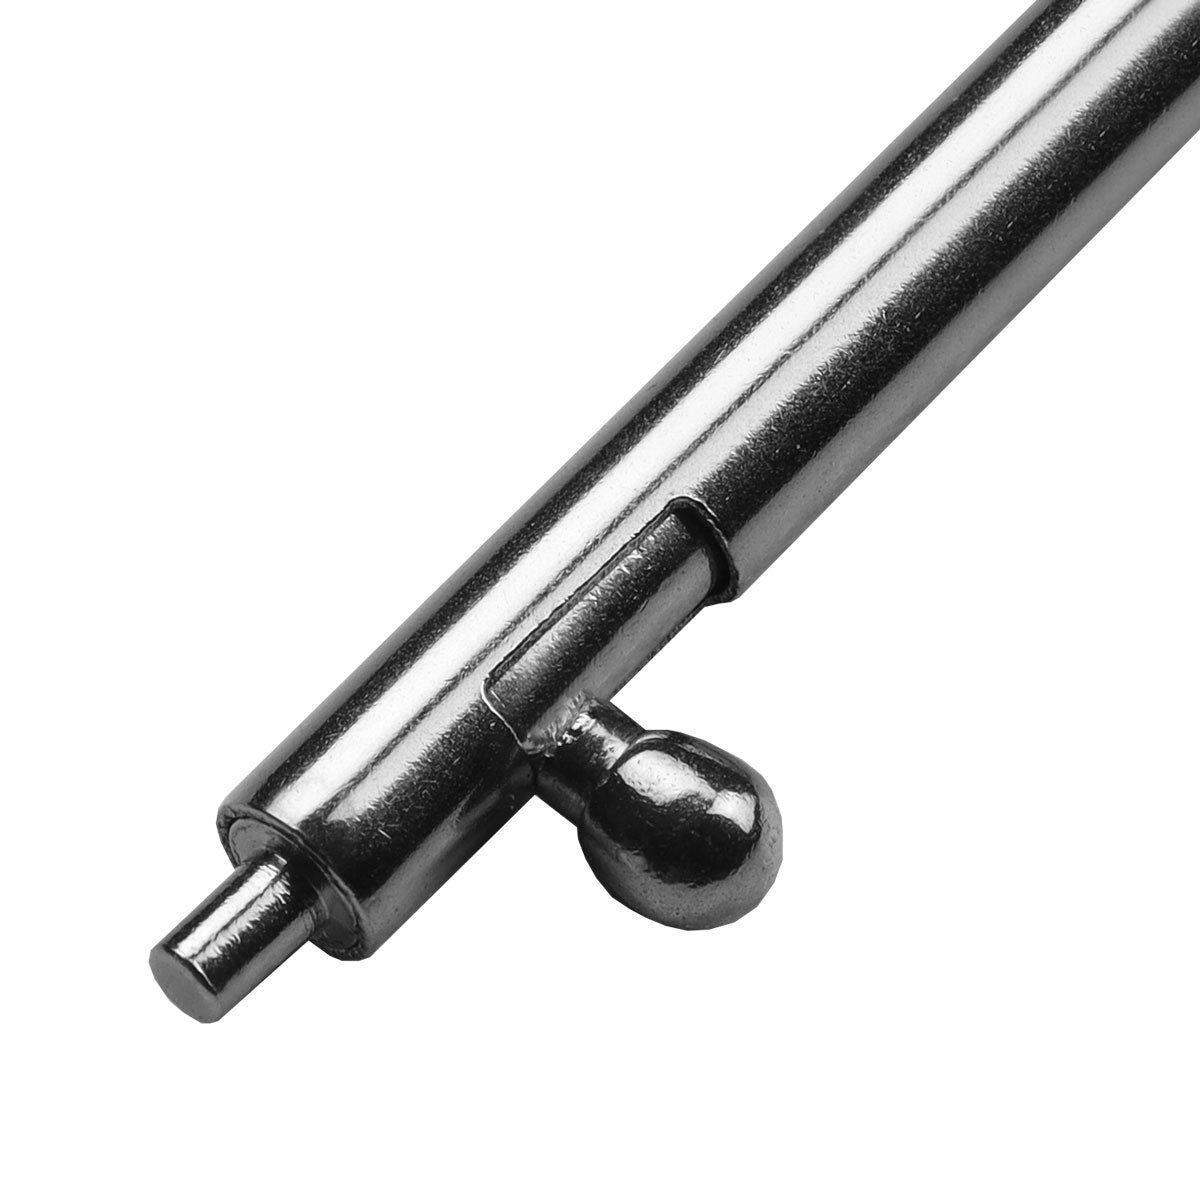 Standard 1.8mm Quick-Release Spring Bars